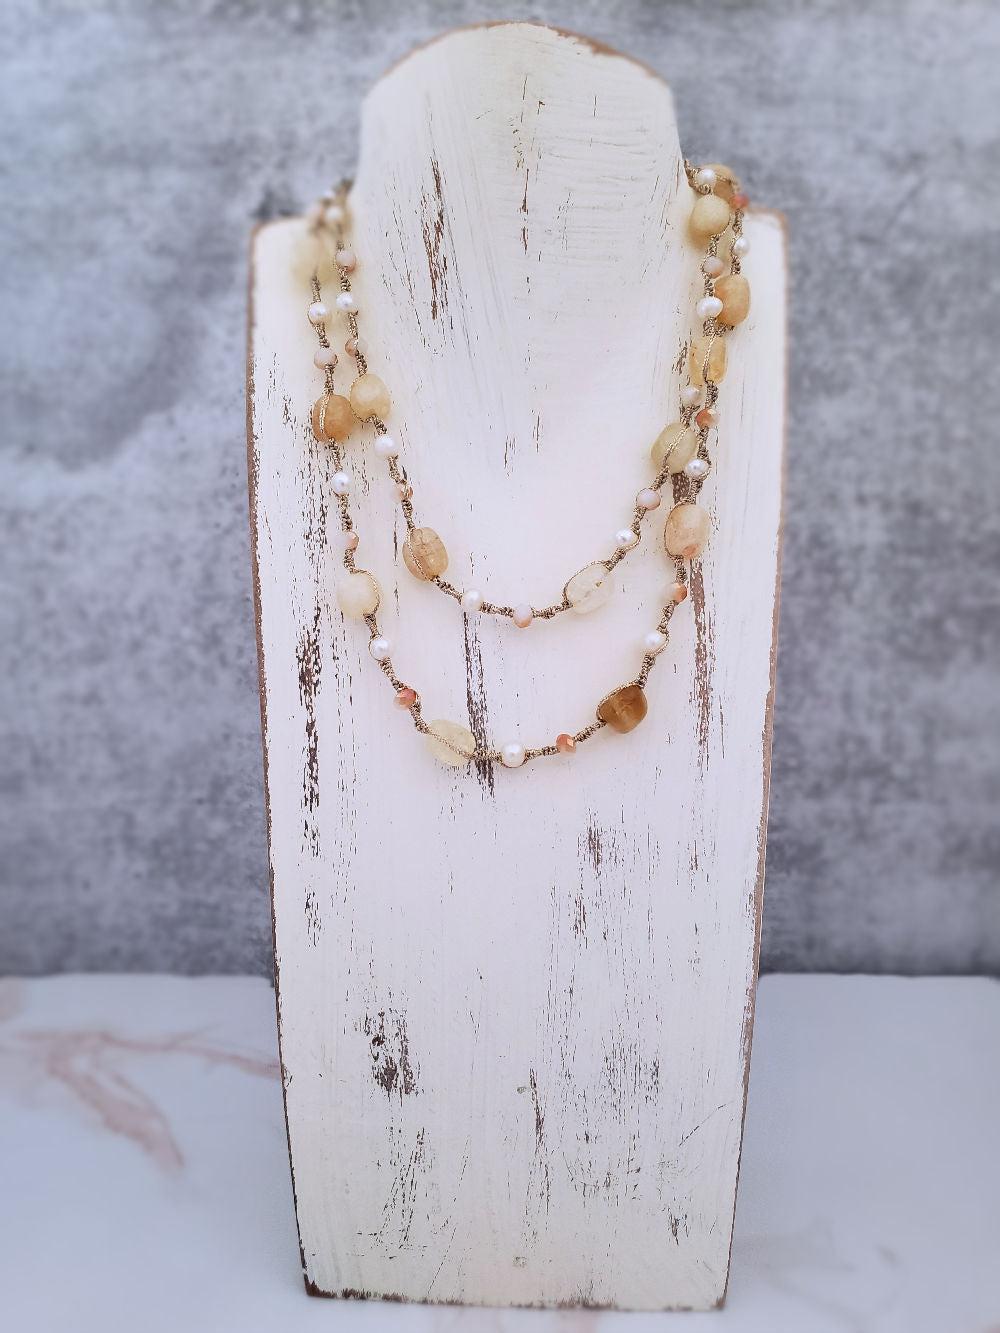 Citrine Necklace with Pearl accents on Macrame